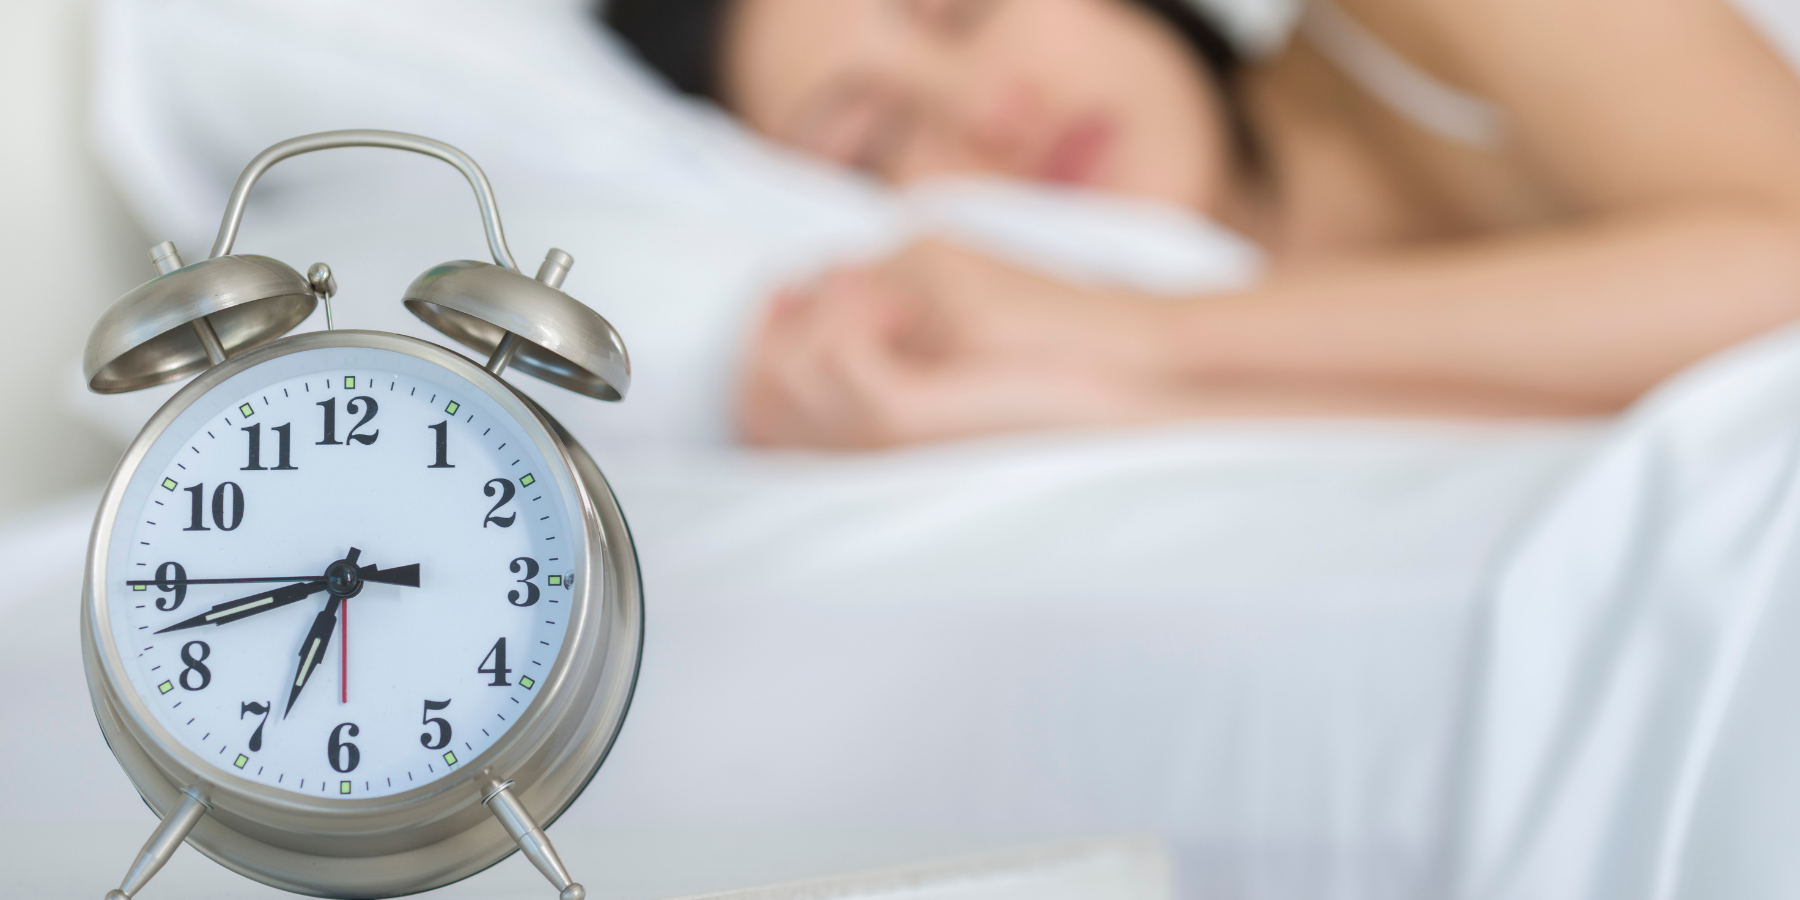 xplore effective strategies to combat sleeping problems after divorce. Learn how to manage insomnia and anxiety for a restful night's sleep